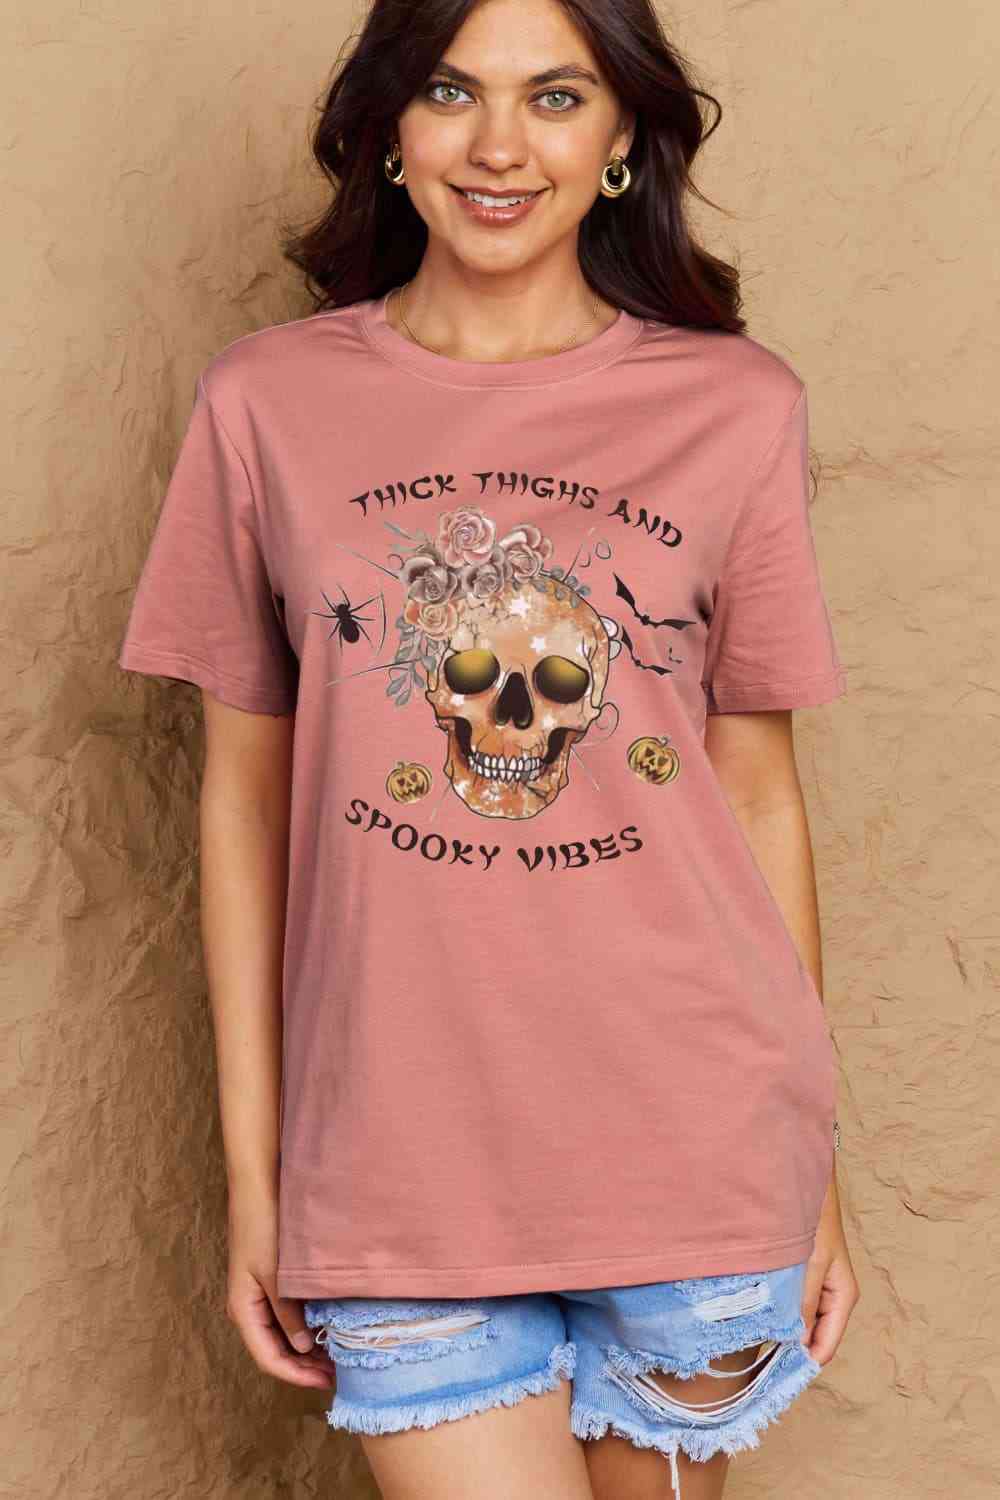 Simply Love Full Size THICK THIGHS AND SPOOKY VIBES Graphic Cotton T-Shirt - Guy Christopher 